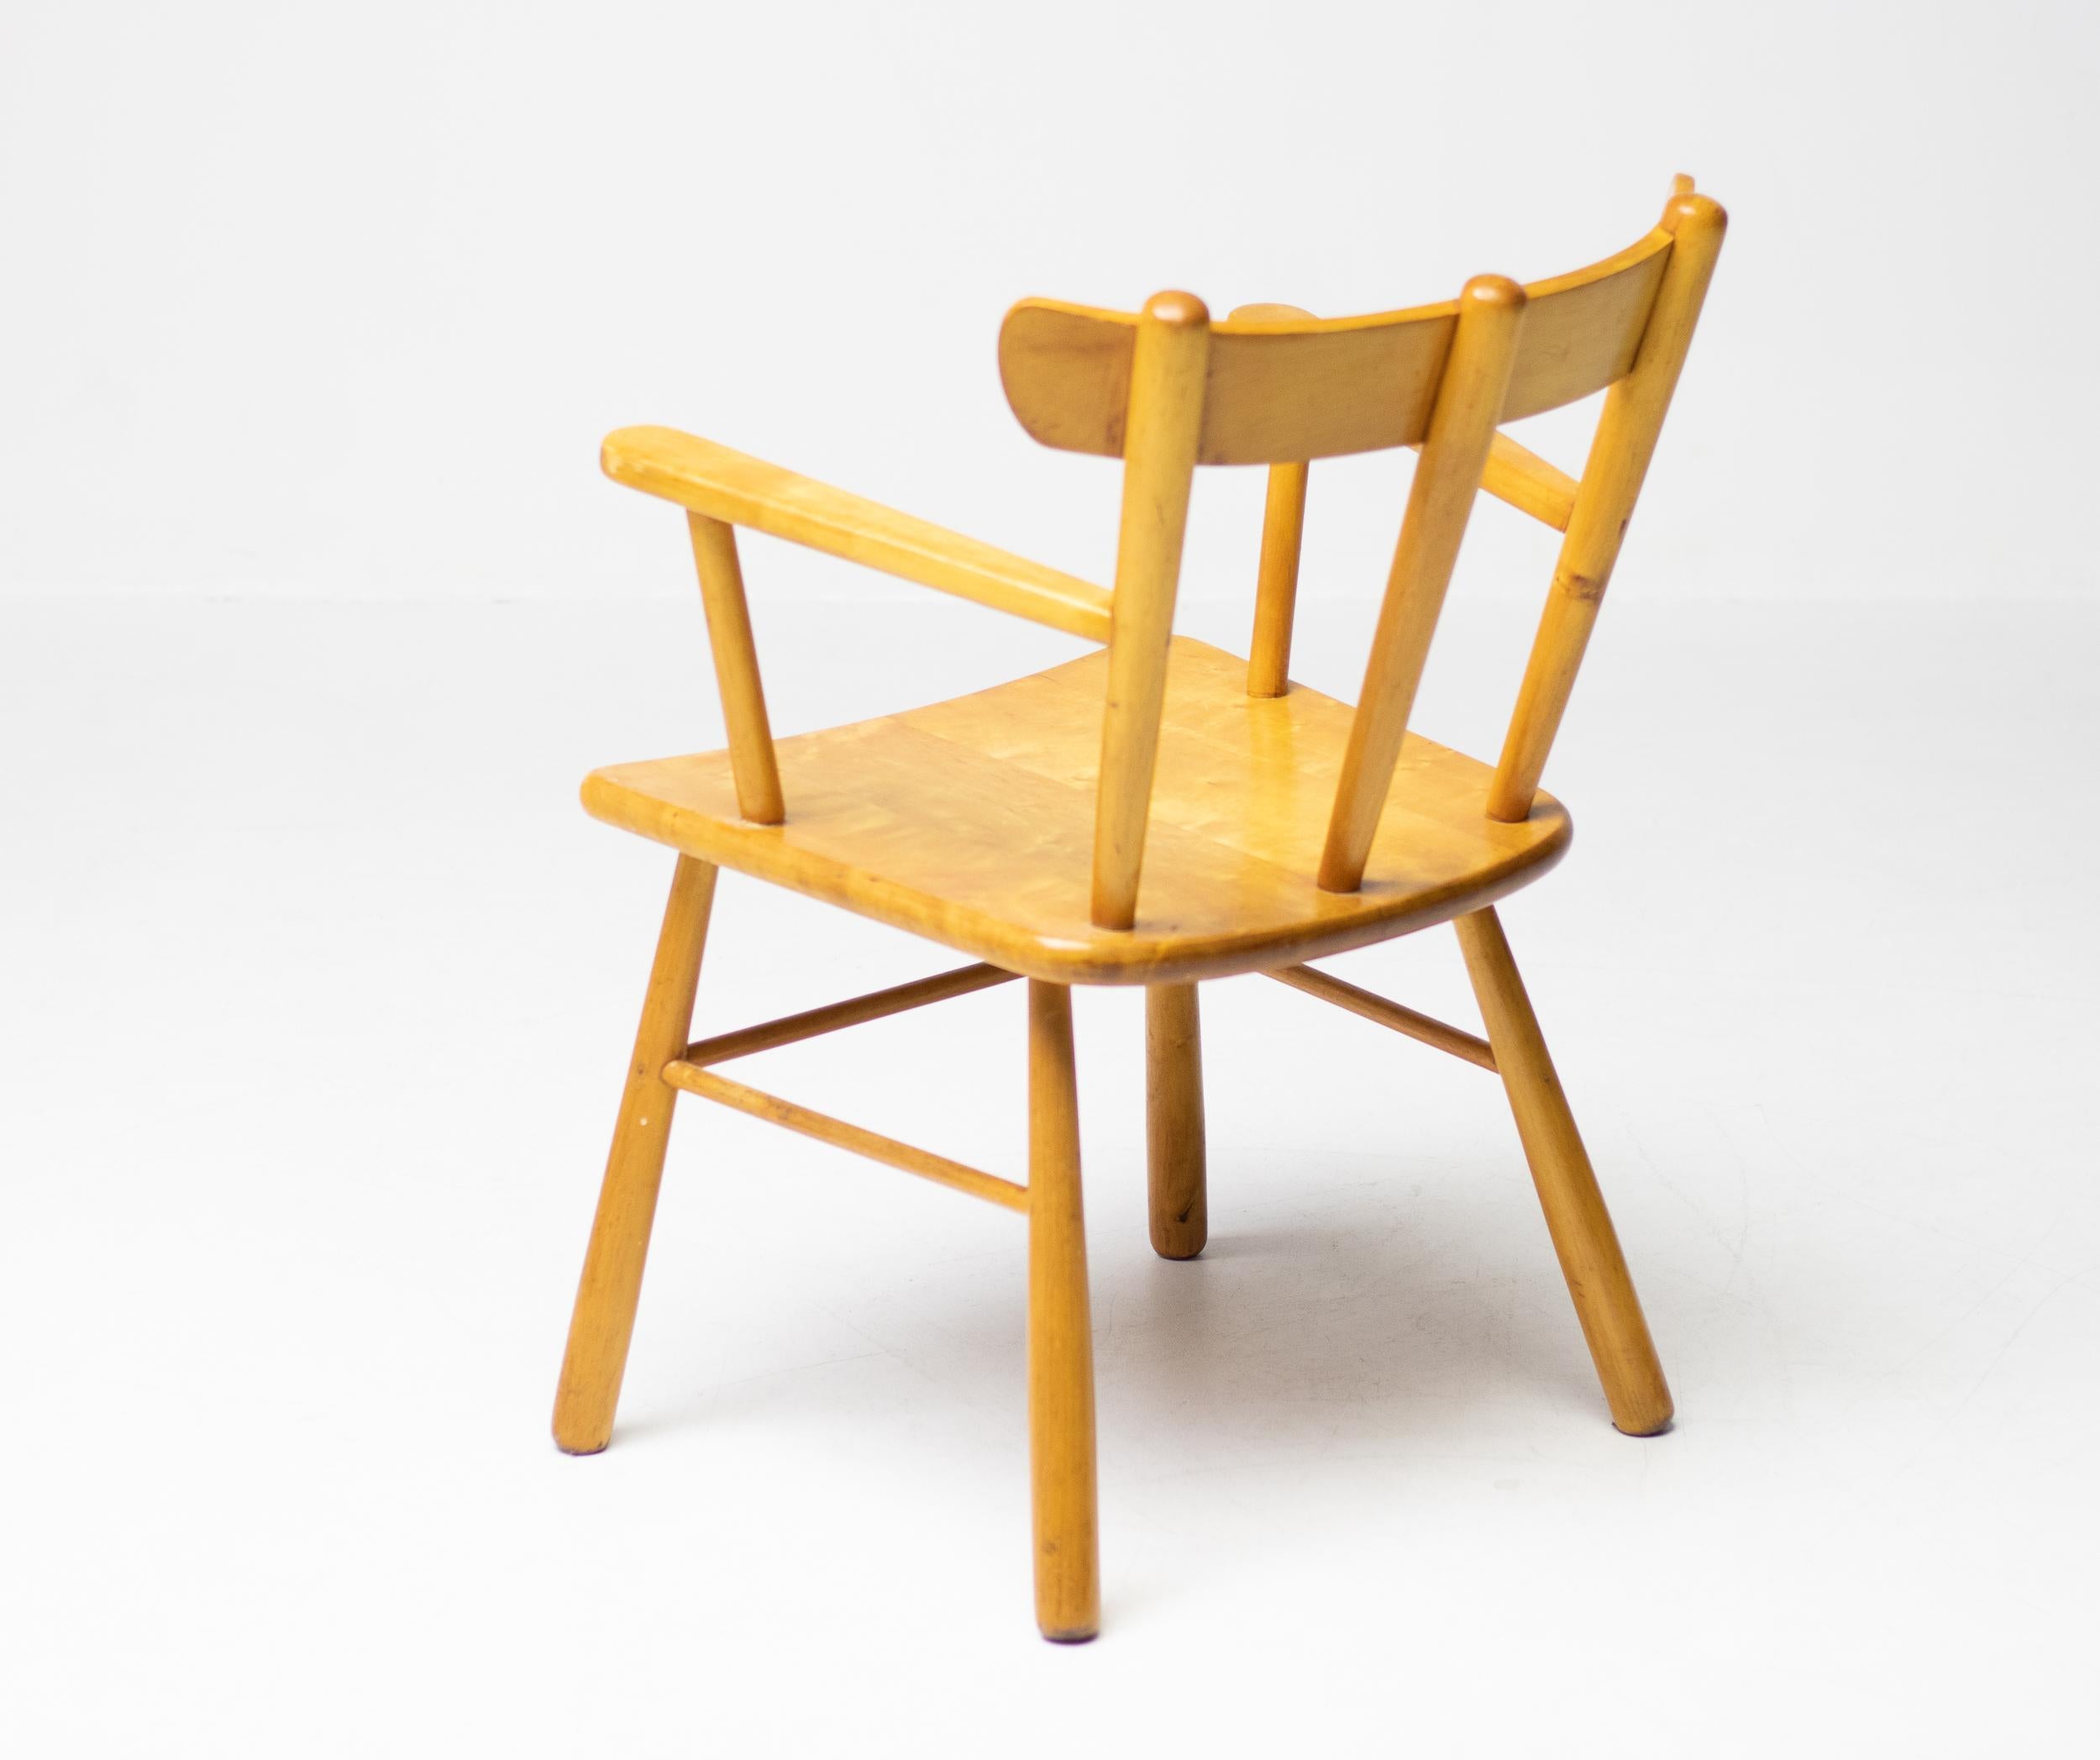 Beautiful, organic and natural arm chair in solid honey colored birch. A simplistic design with a round seating and attention for the natural expression and grain of the wood. This chair hold a beautiful curved back and solid tapered legs. The grain